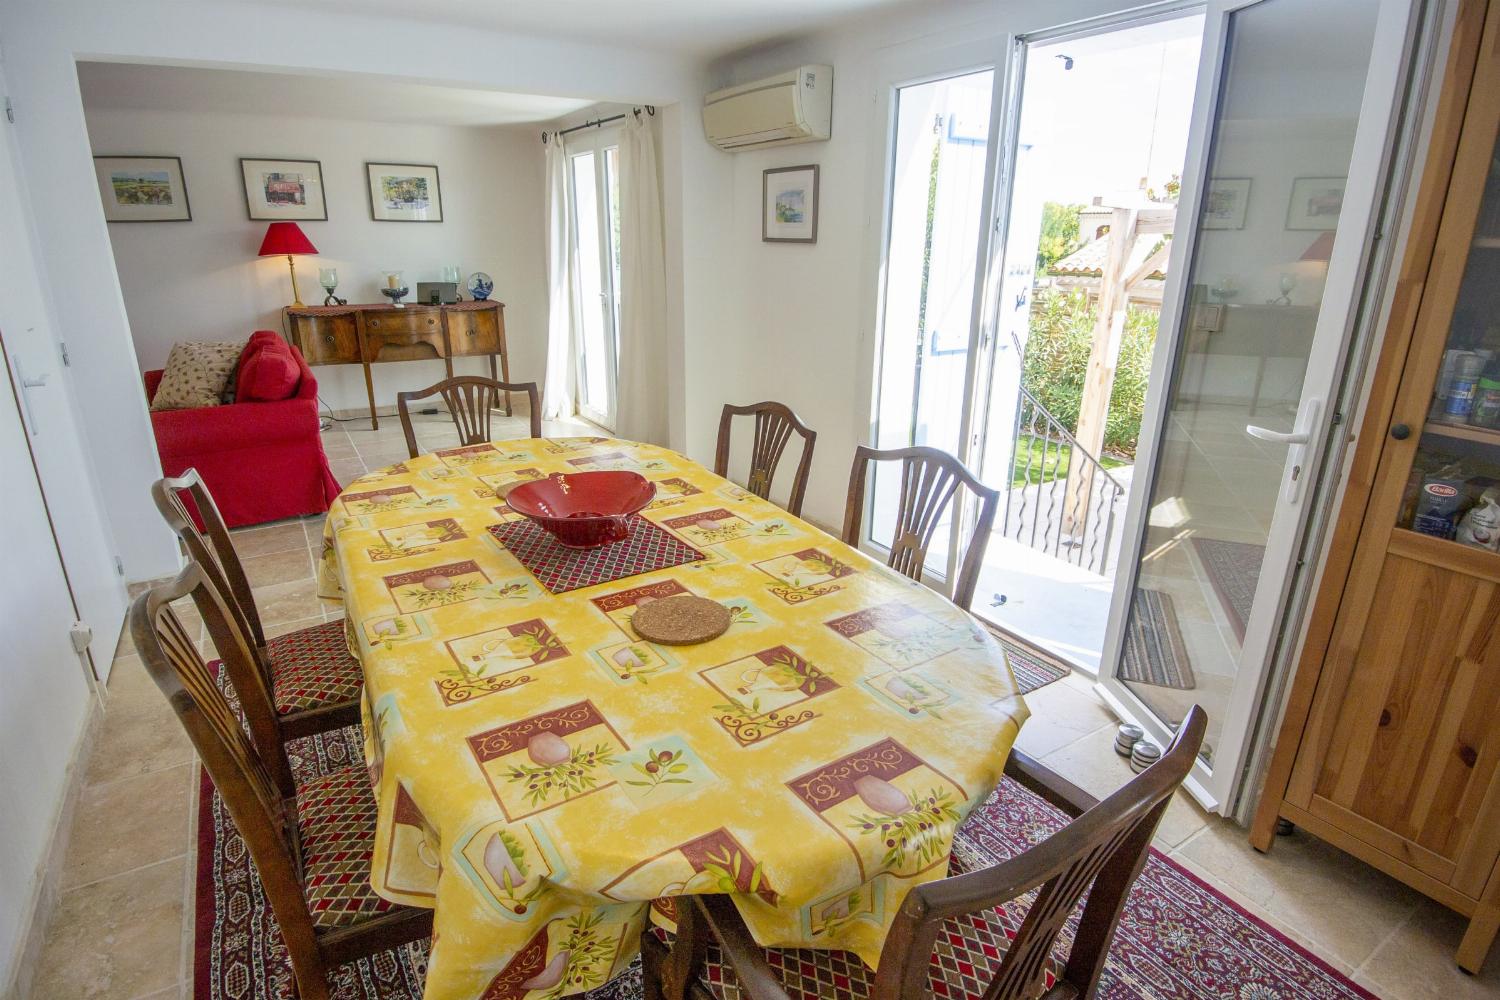 Dining room | Rental home in South of France